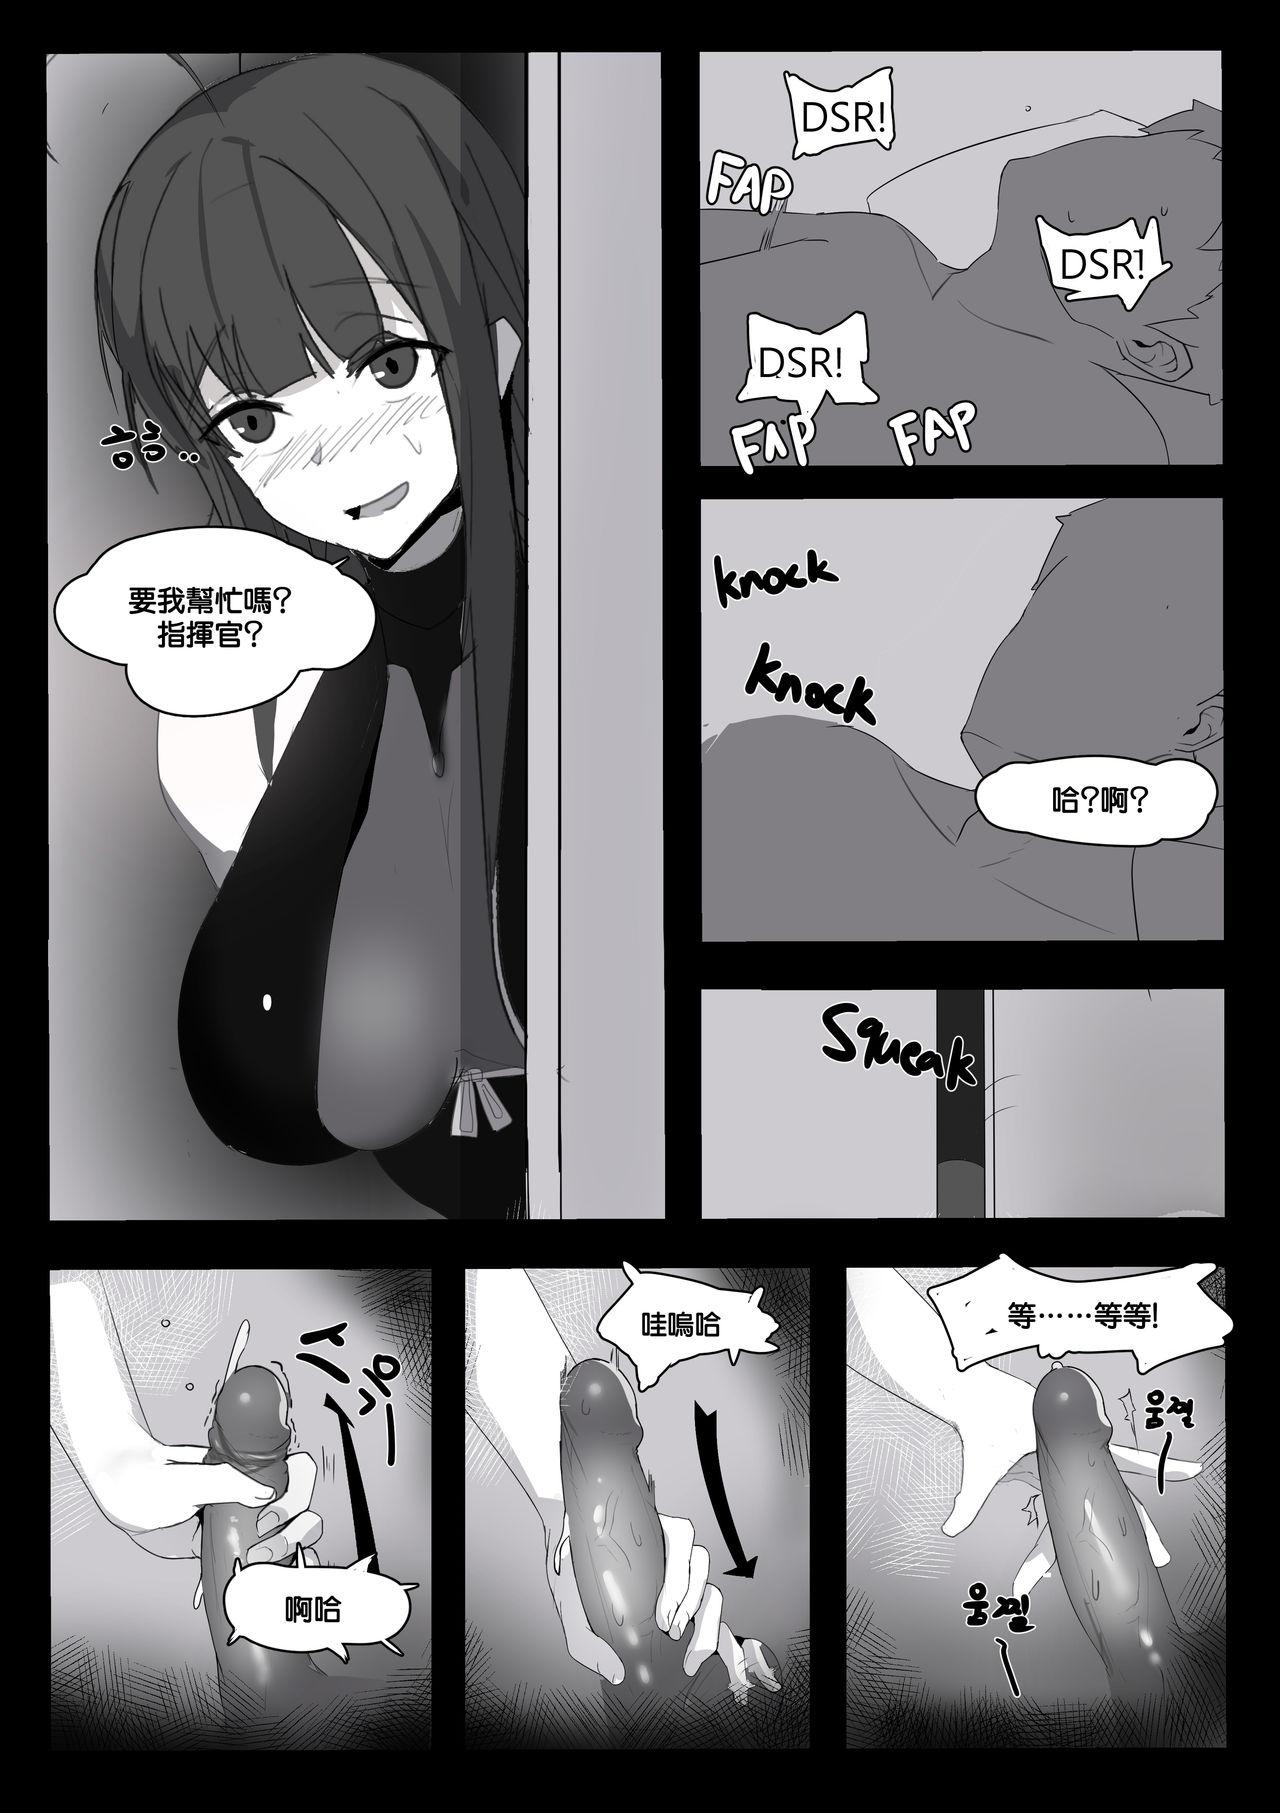 Realamateur August 2018 - DSR Manga - Girls frontline Chubby - Page 4